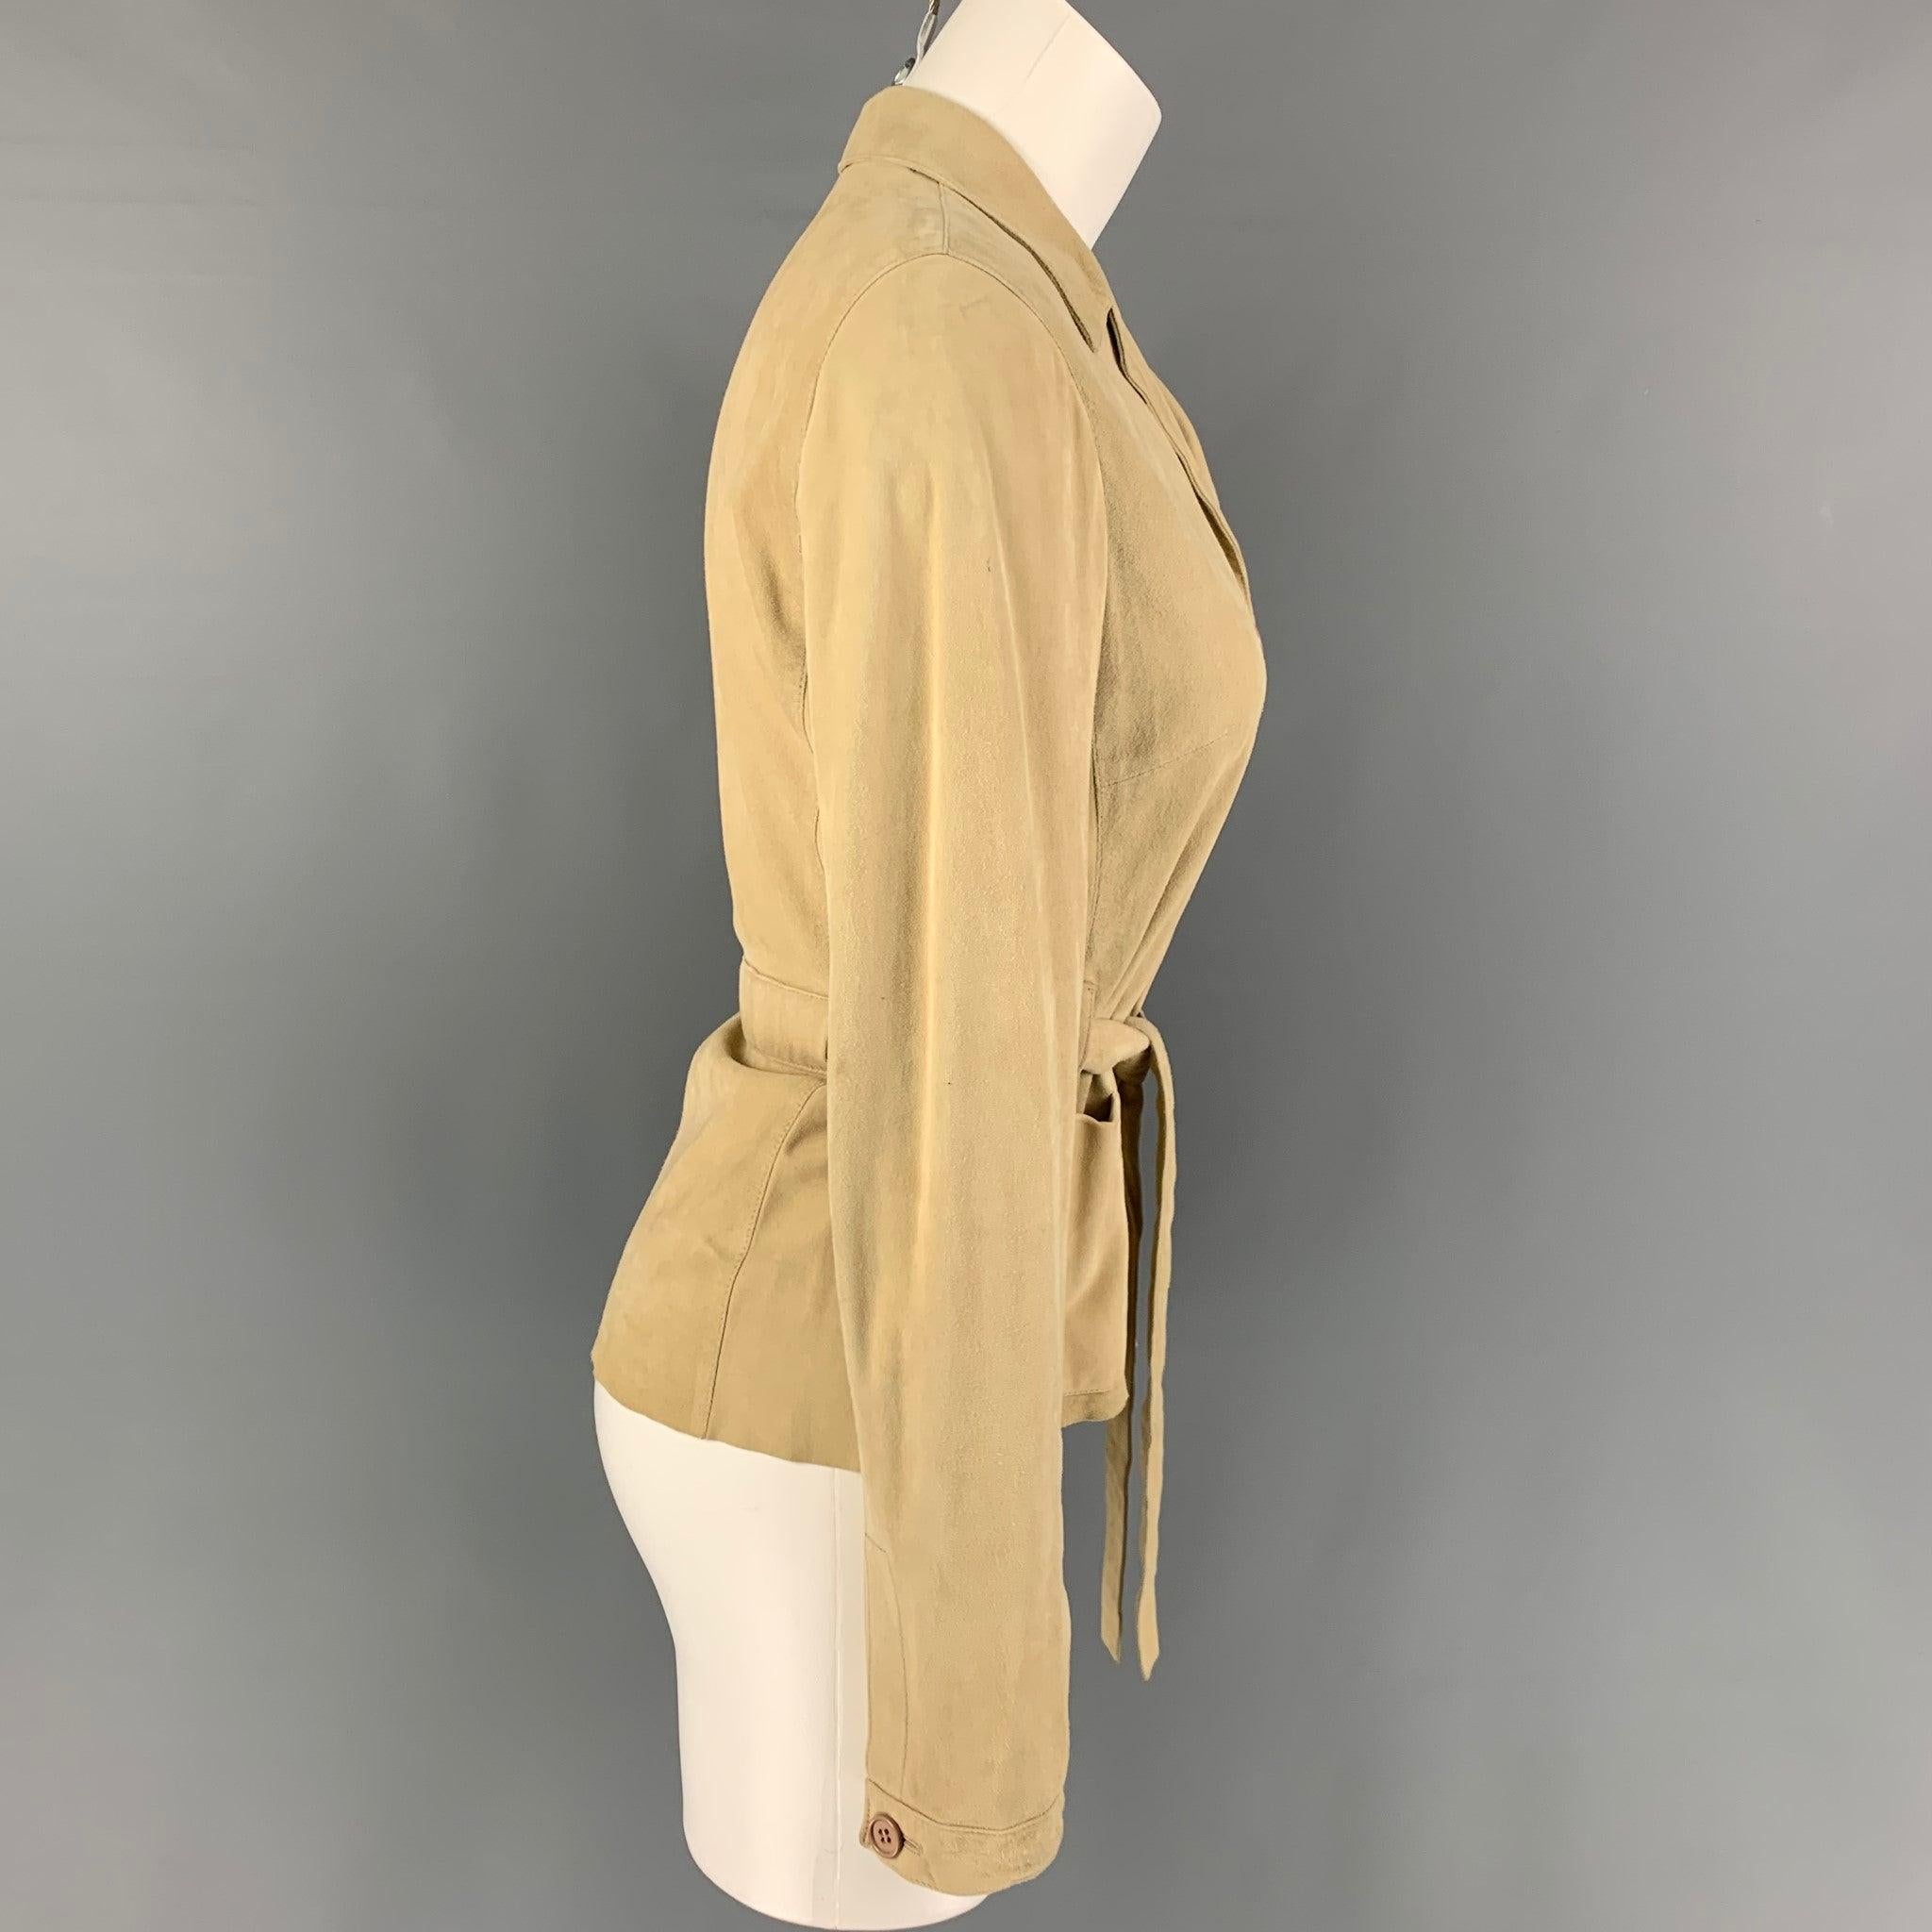 MIU MIU jacket comes in a beige suede featuring a notch lapel, patch pockets, belted, and a buttoned closure. Made in Italy.
Good
Pre-Owned Condition.
Light wear & marks throughout. As-Is.  

Marked:   40 

Measurements: 
 
Shoulder:
16 inches 